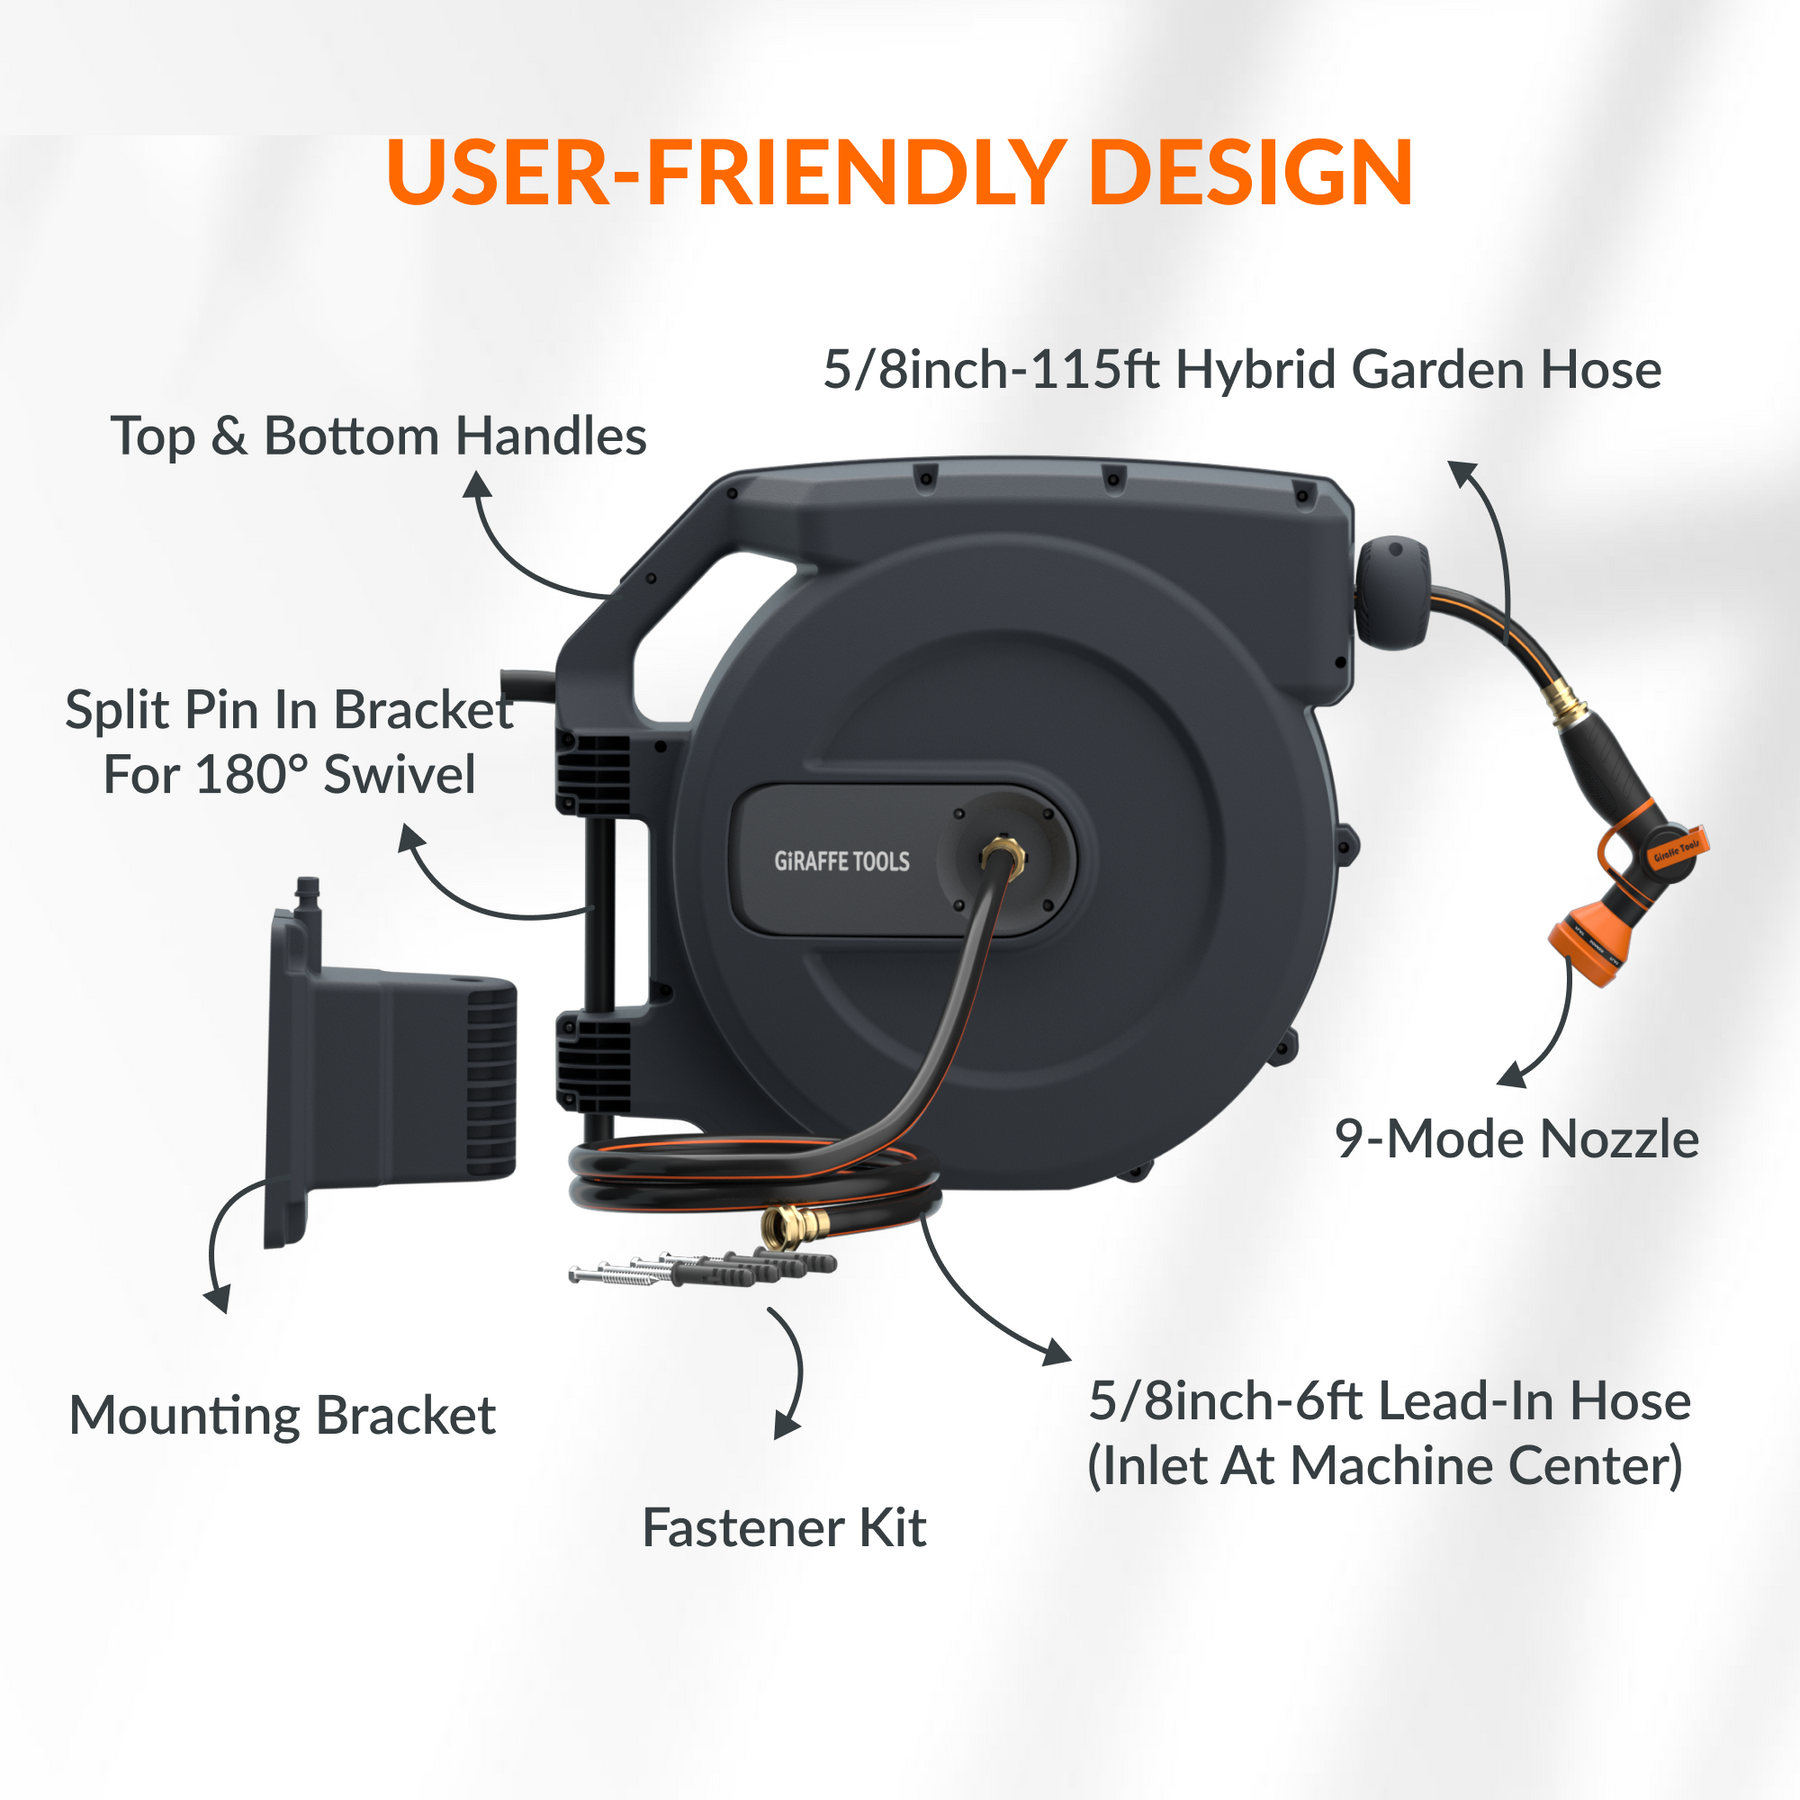 VEVOR Retractable Hose Reel 5/8 in. x 65 ft. Wall Mounted Garden Hose Reel  with Swivel Bracket and 7 Pattern Nozzle Water Hose SSS65FT58INCHYIS9V0 